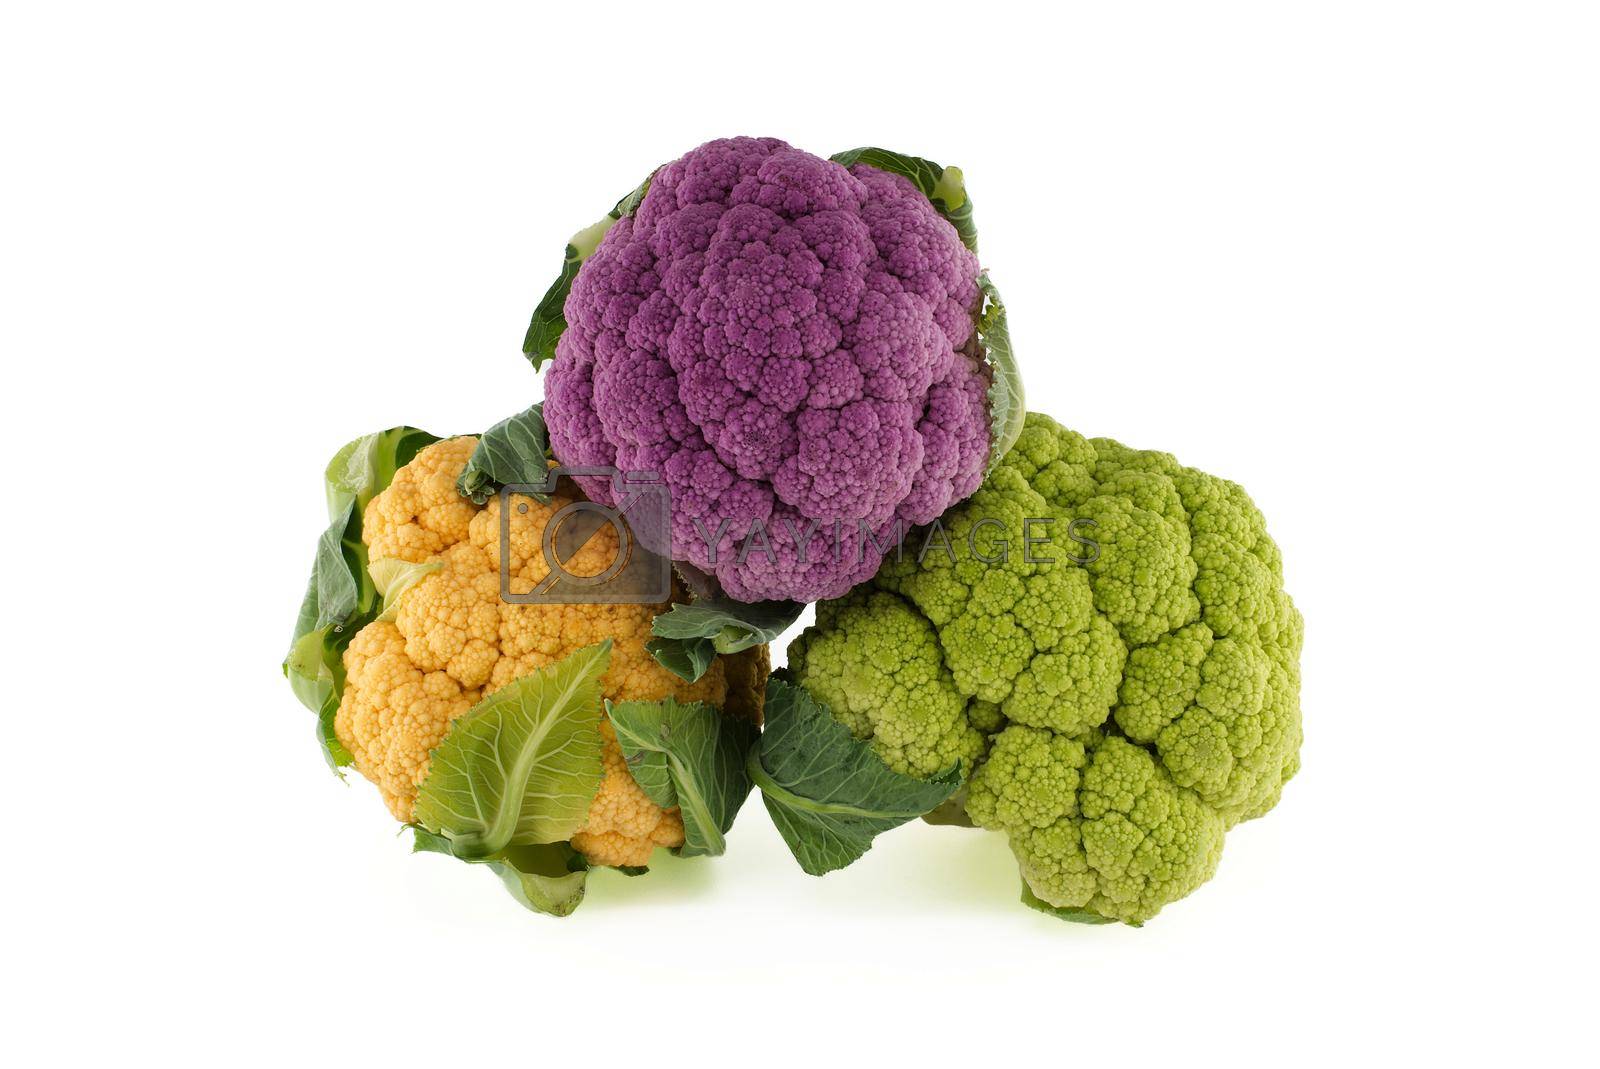 Royalty free image of Colorful cauliflower cabbages on white by NetPix